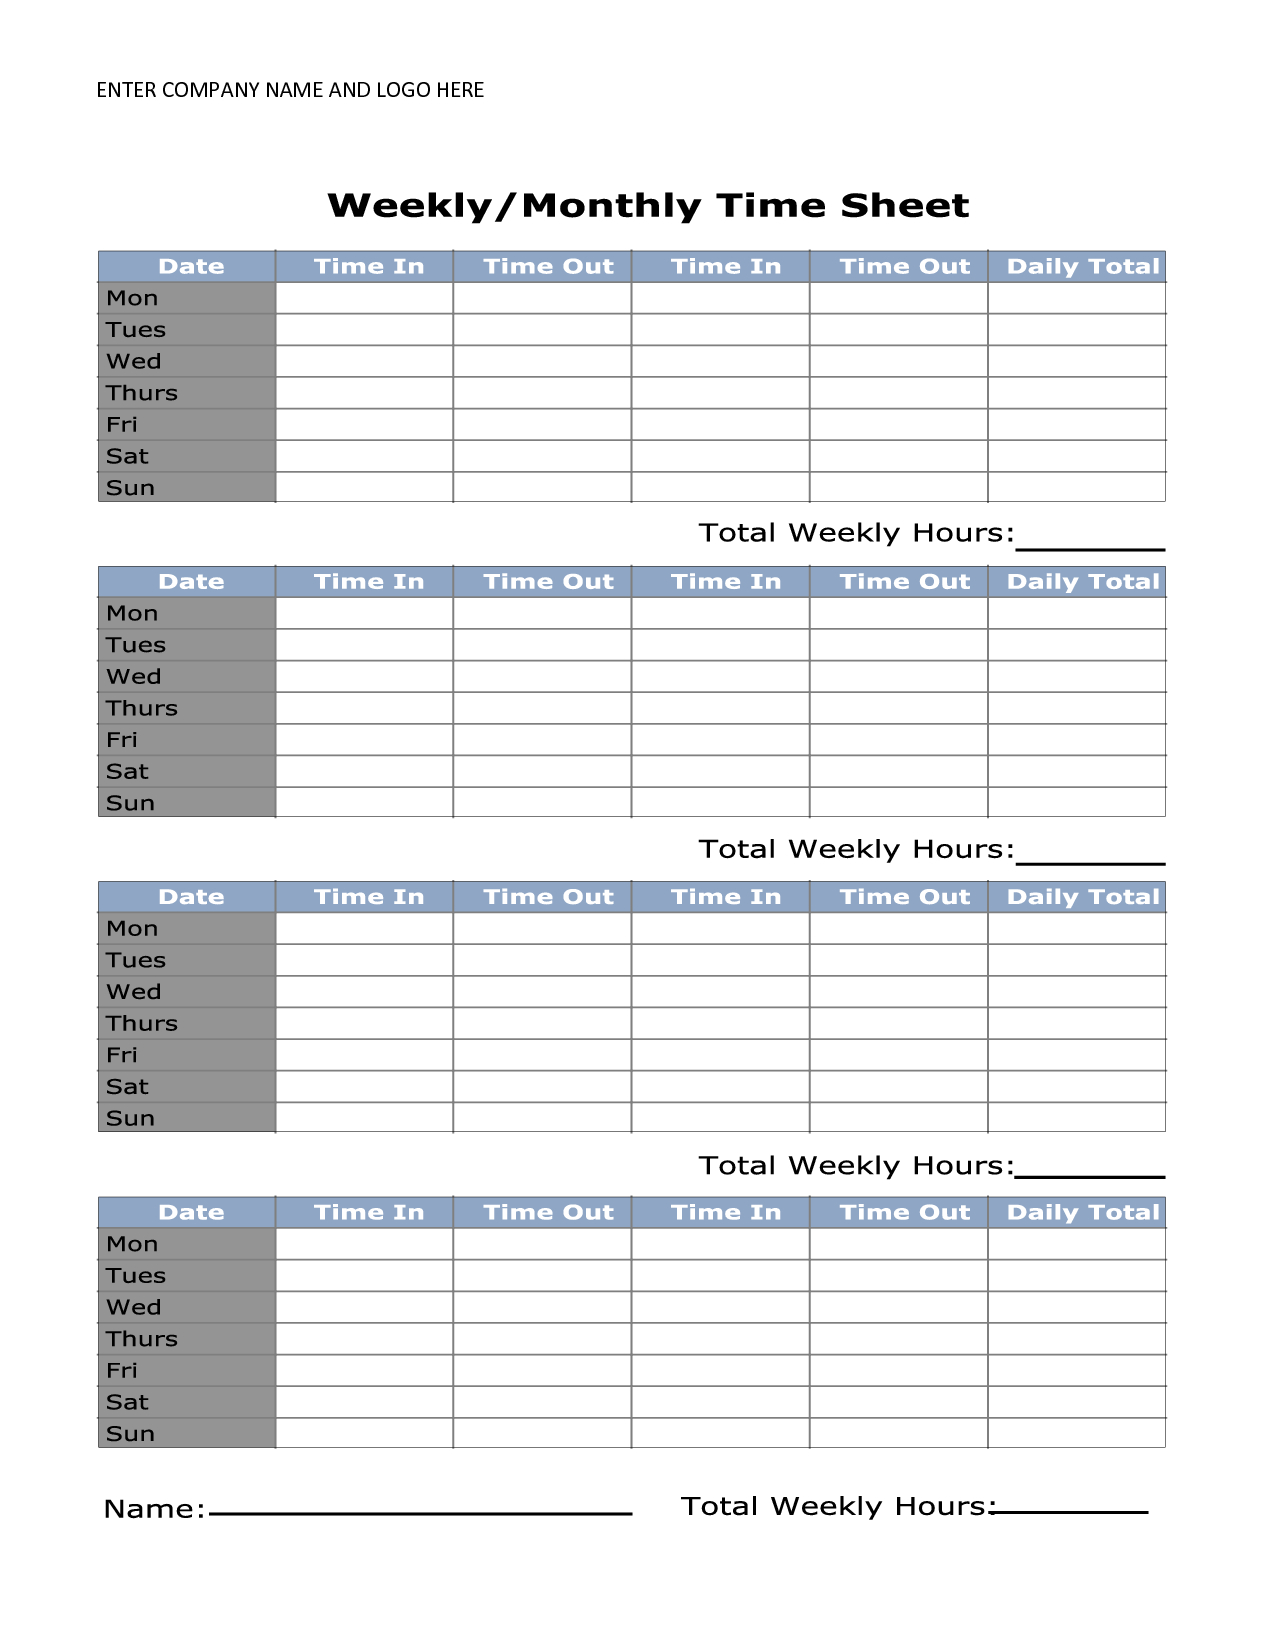 Free Printable Monthly Time Sheets | Time Sheet | Timesheet Template - Free Printable Time Sheets